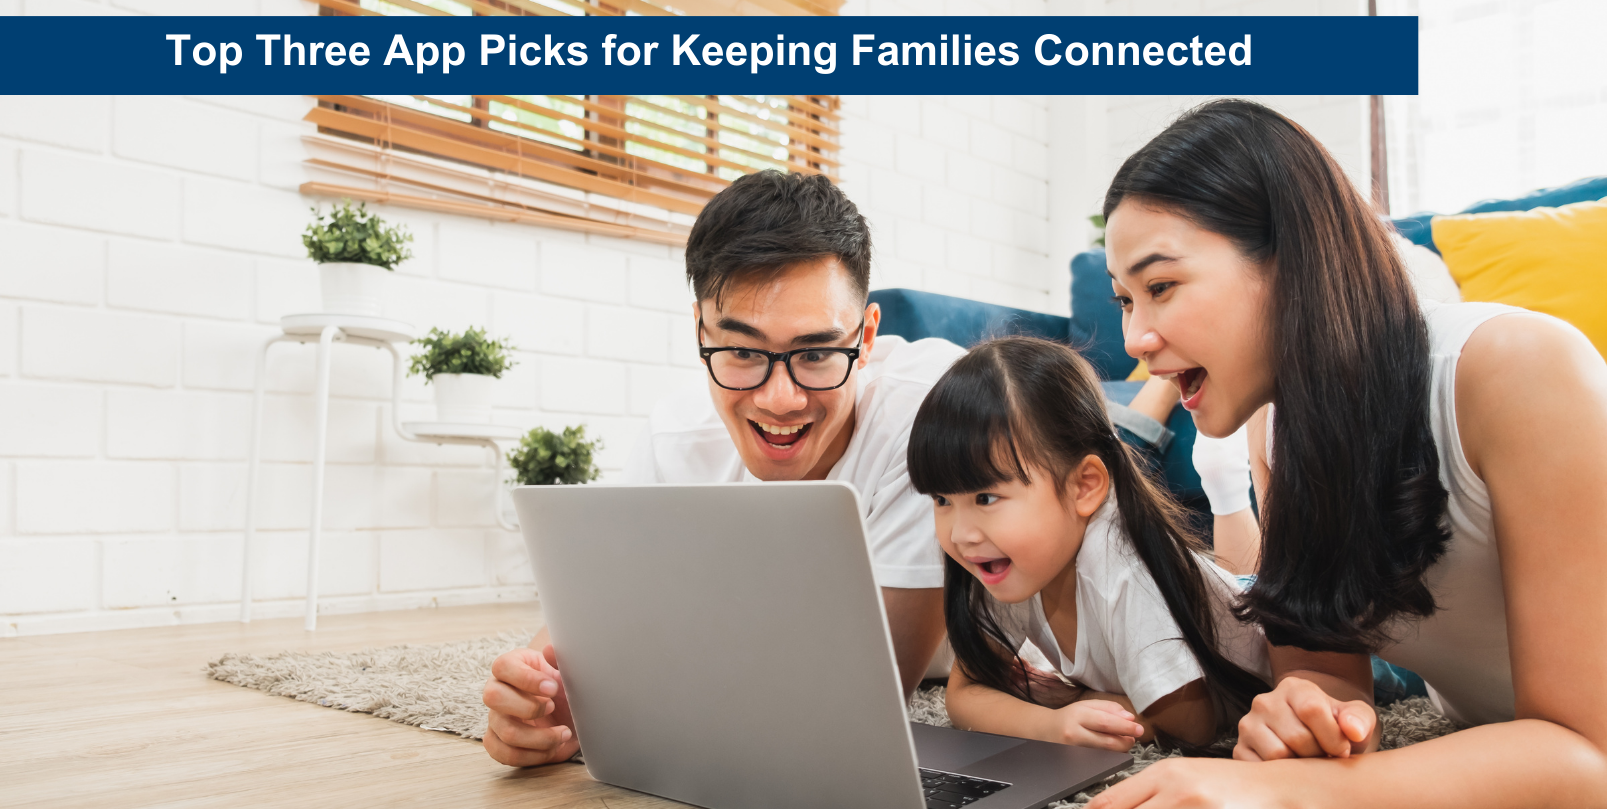 Apps to keep families connected